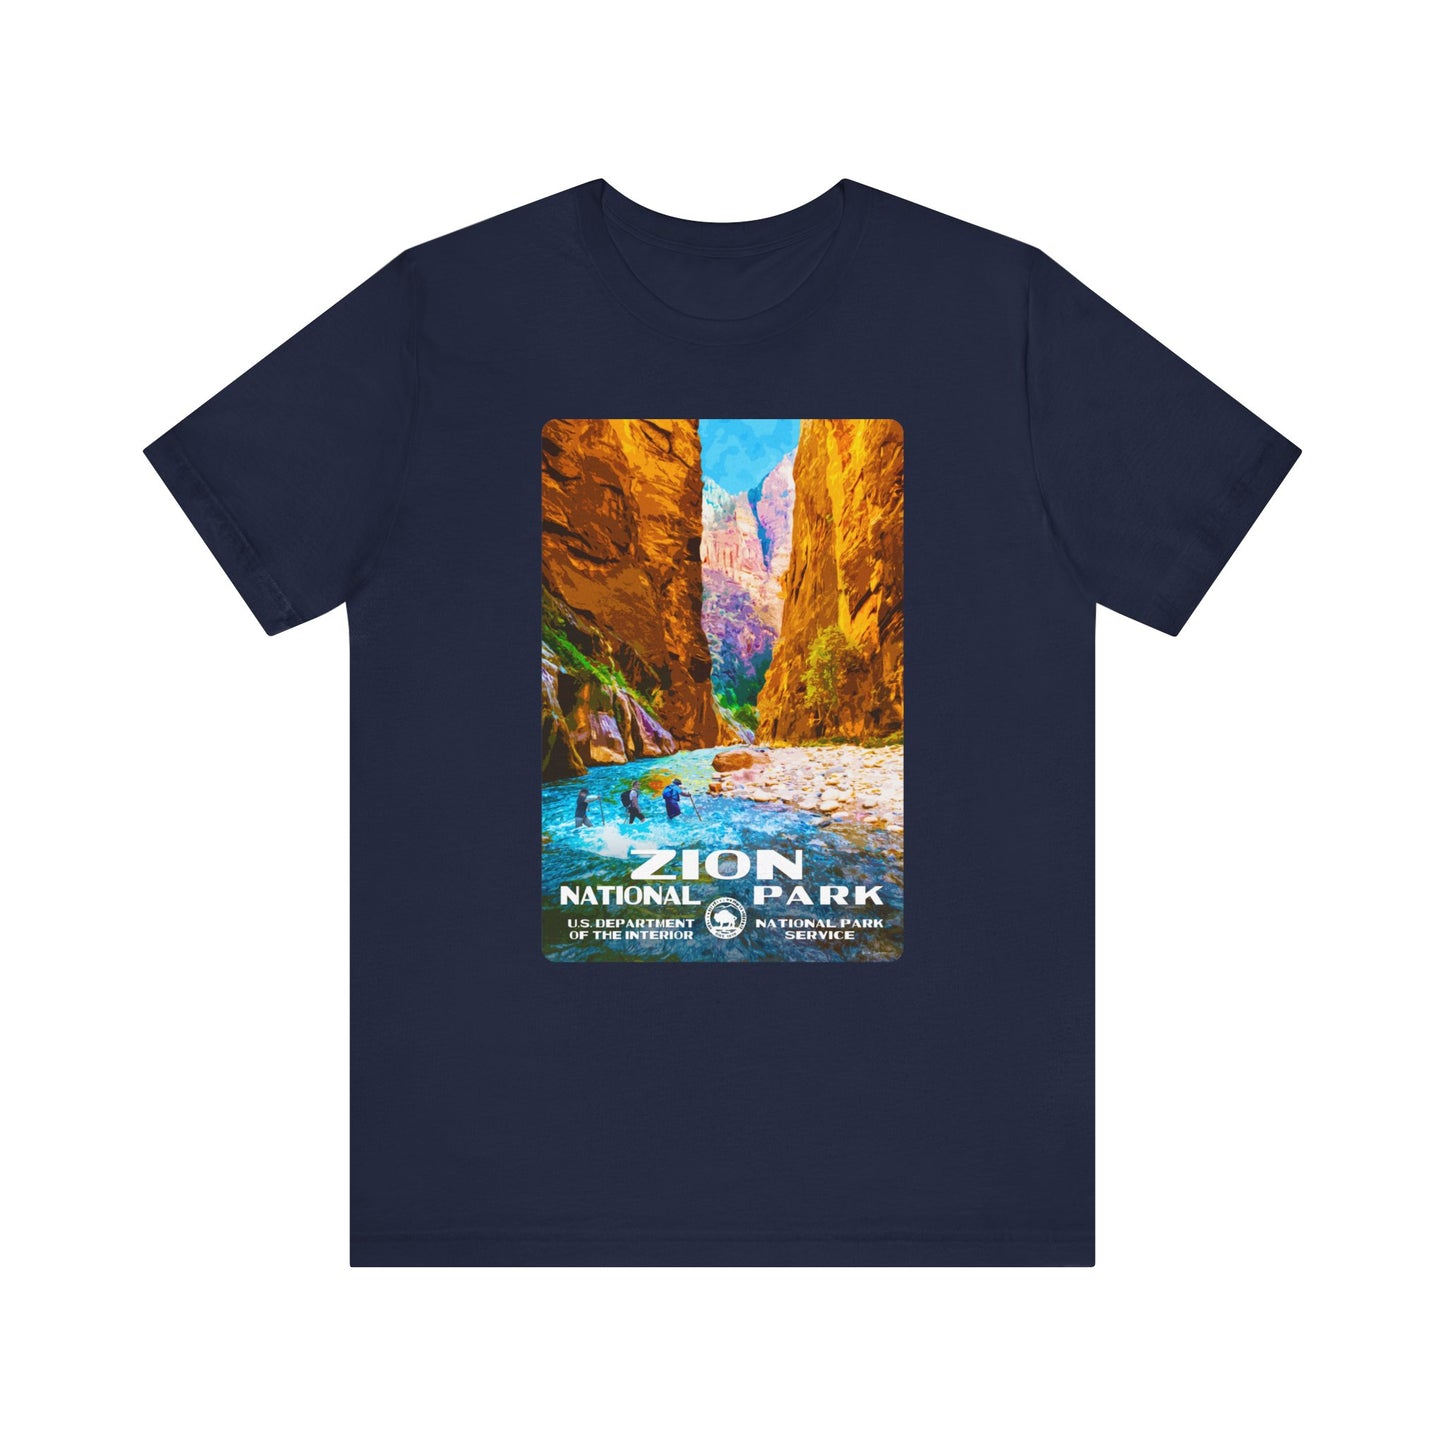 Zion National Park (The Narrows) T-Shirt